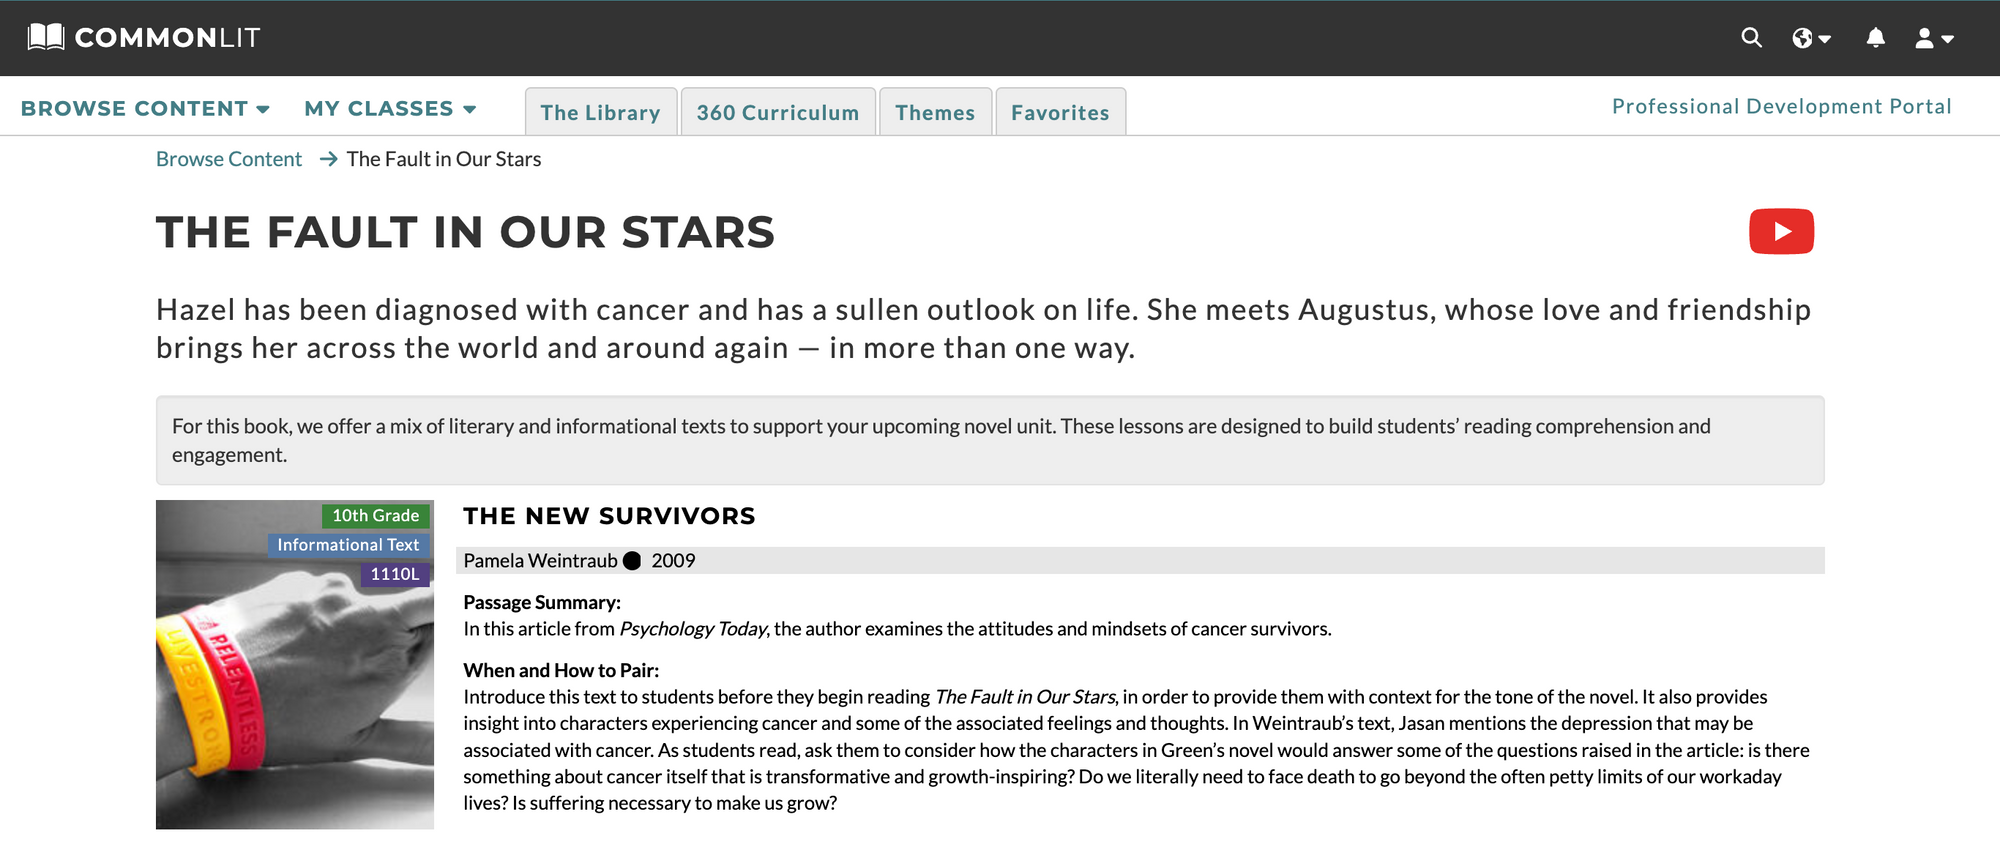 A screenshot of the top of the Book Pairings page for "The Fault in Our Stars" 